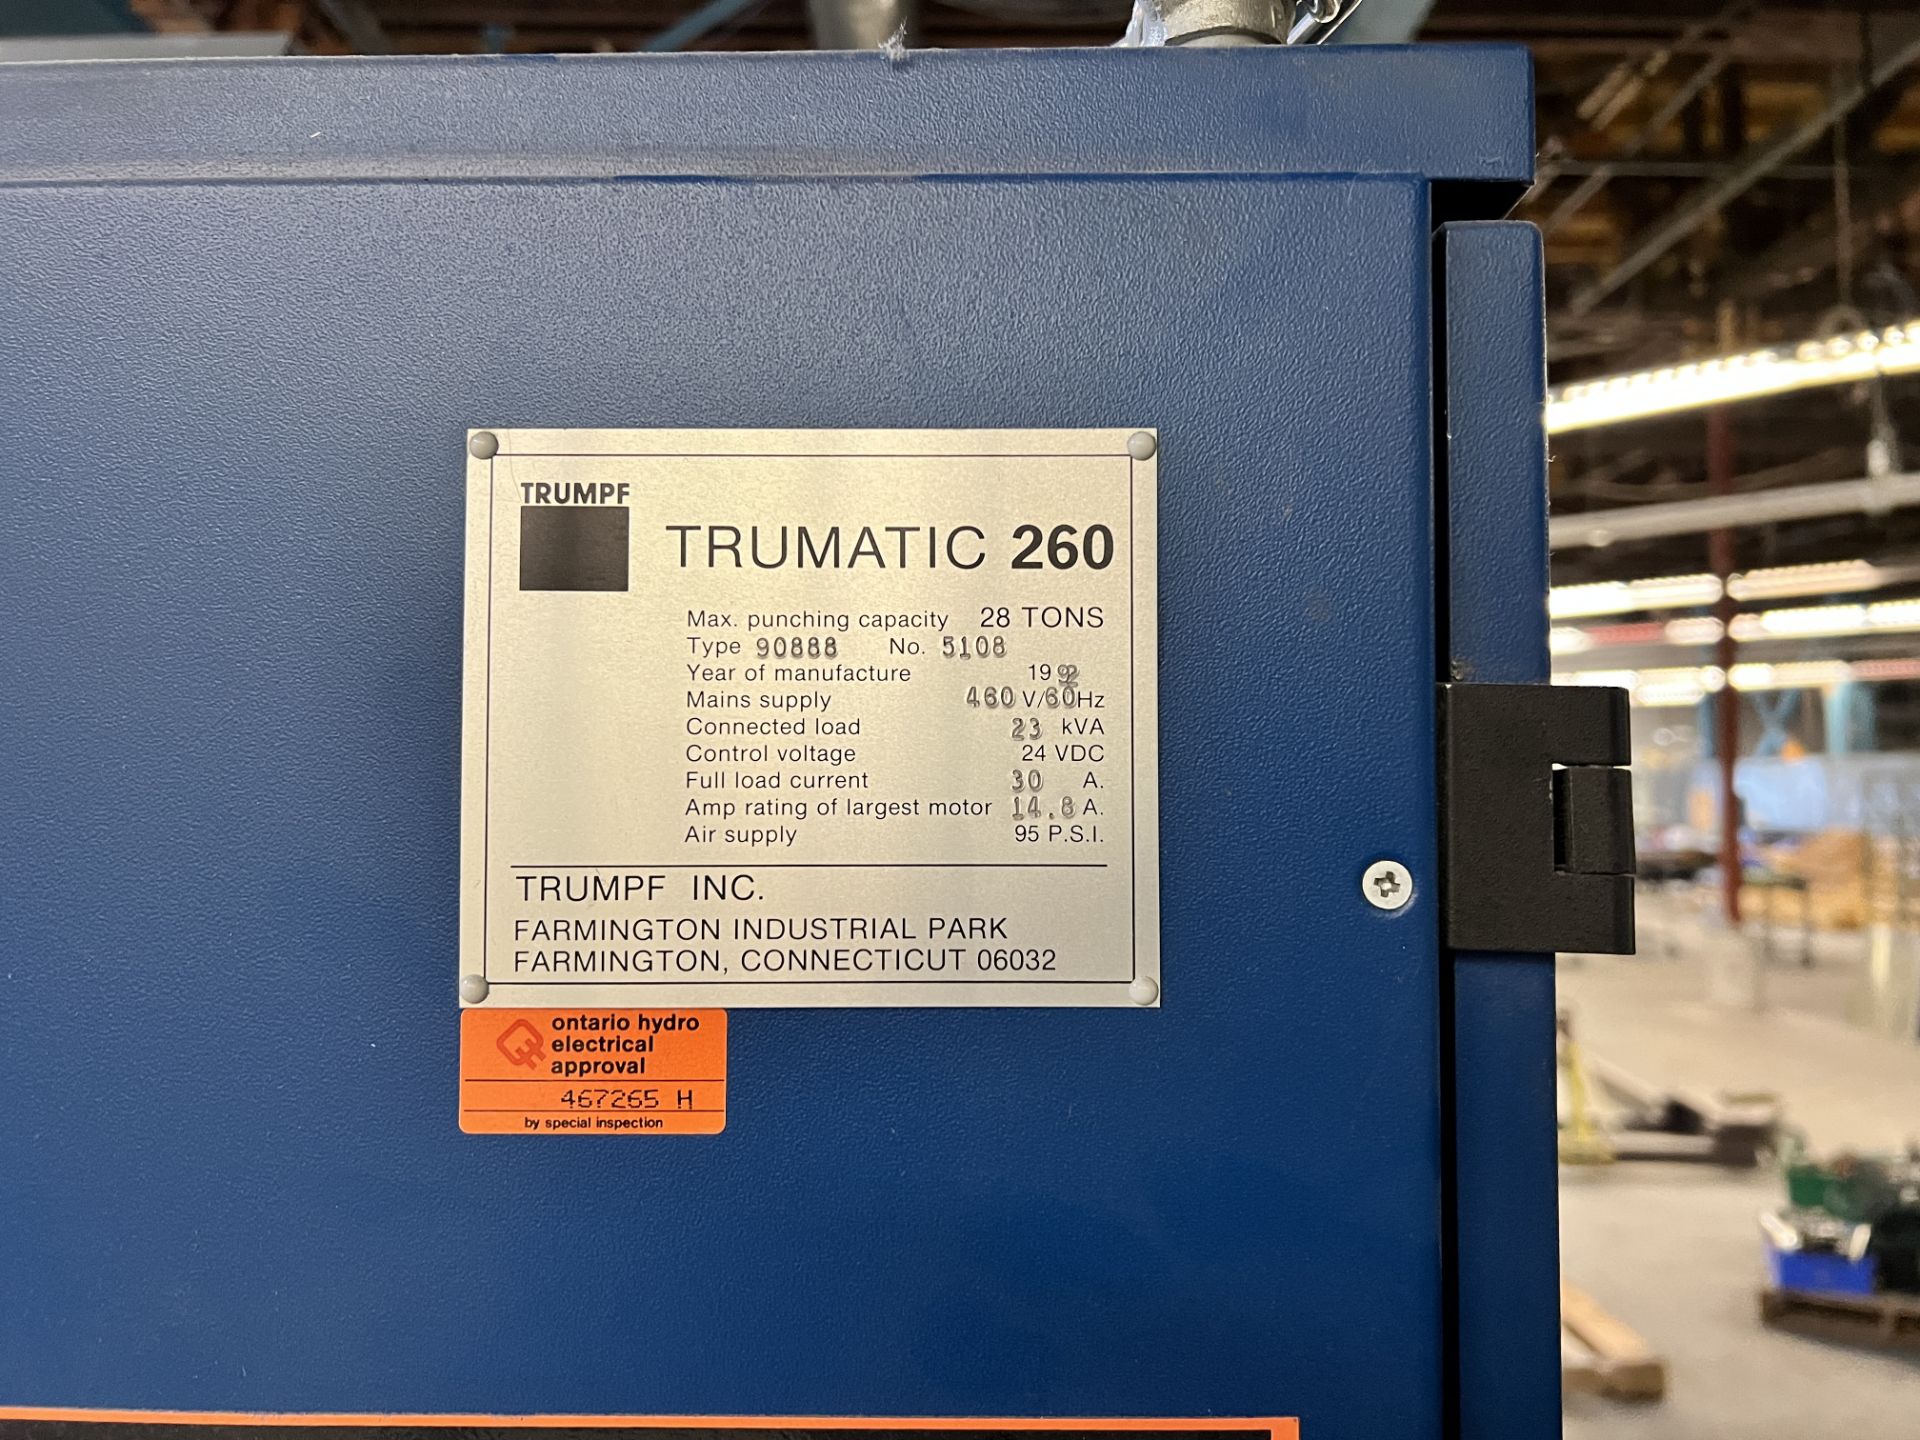 TRUMPF TRUMATIC 260A ROTATION TURRET PUNCHING MACHINE, 28 TONS MAX PUNCH, S/N 5108, 460V, - Image 4 of 6